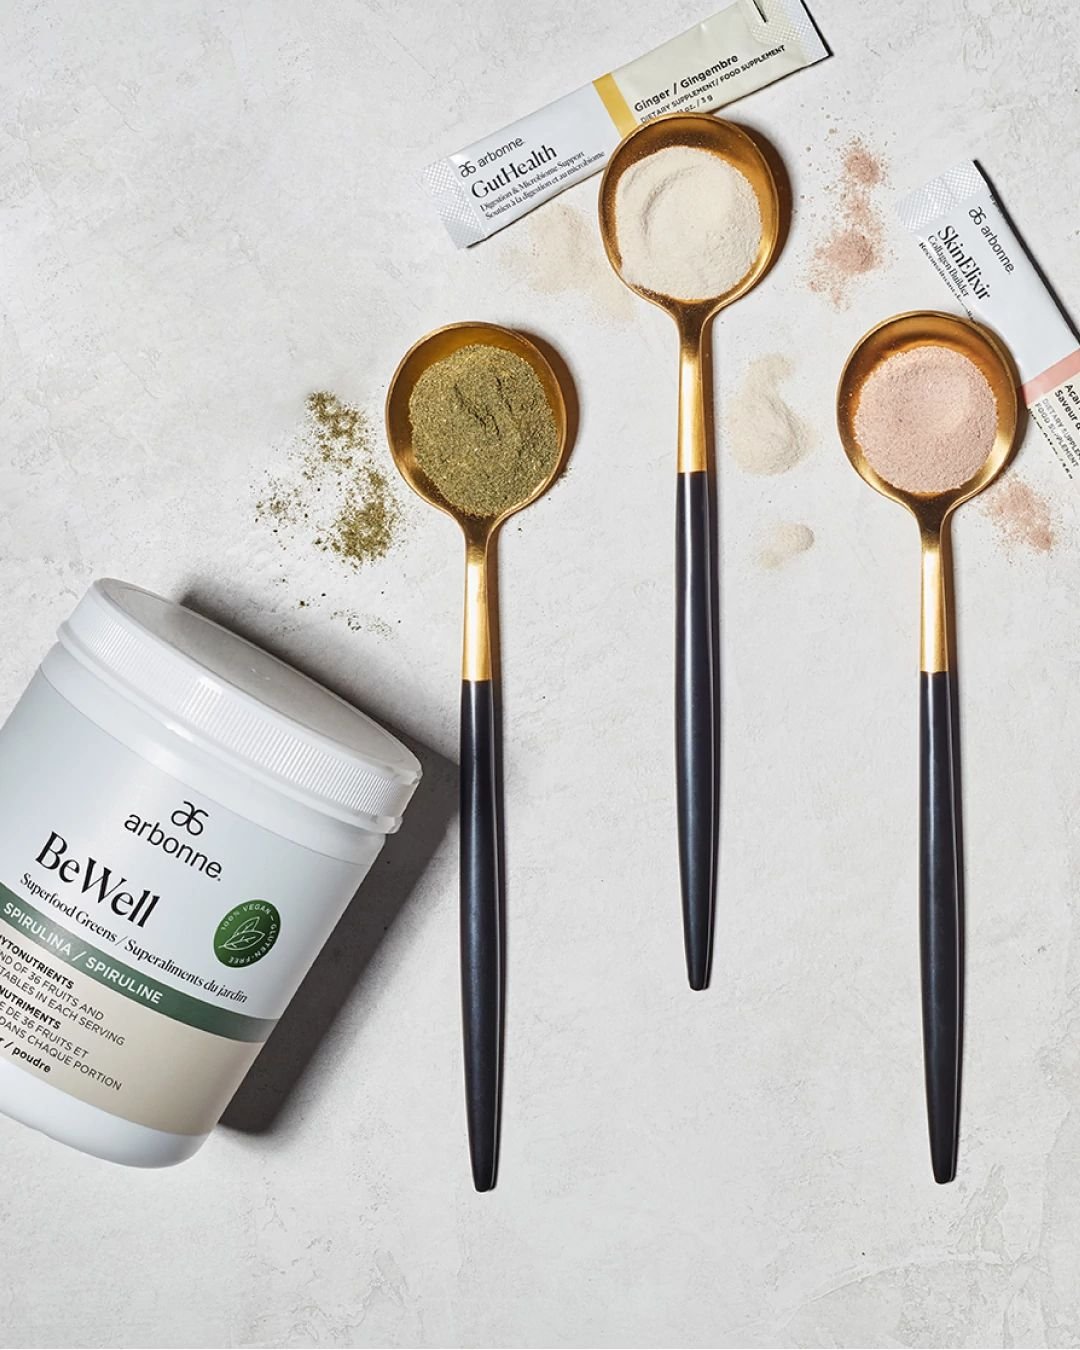 Arbonne BeWell superfood greens with GutHealth and SkinElixir supplements in measuring spoons on a textured surface.